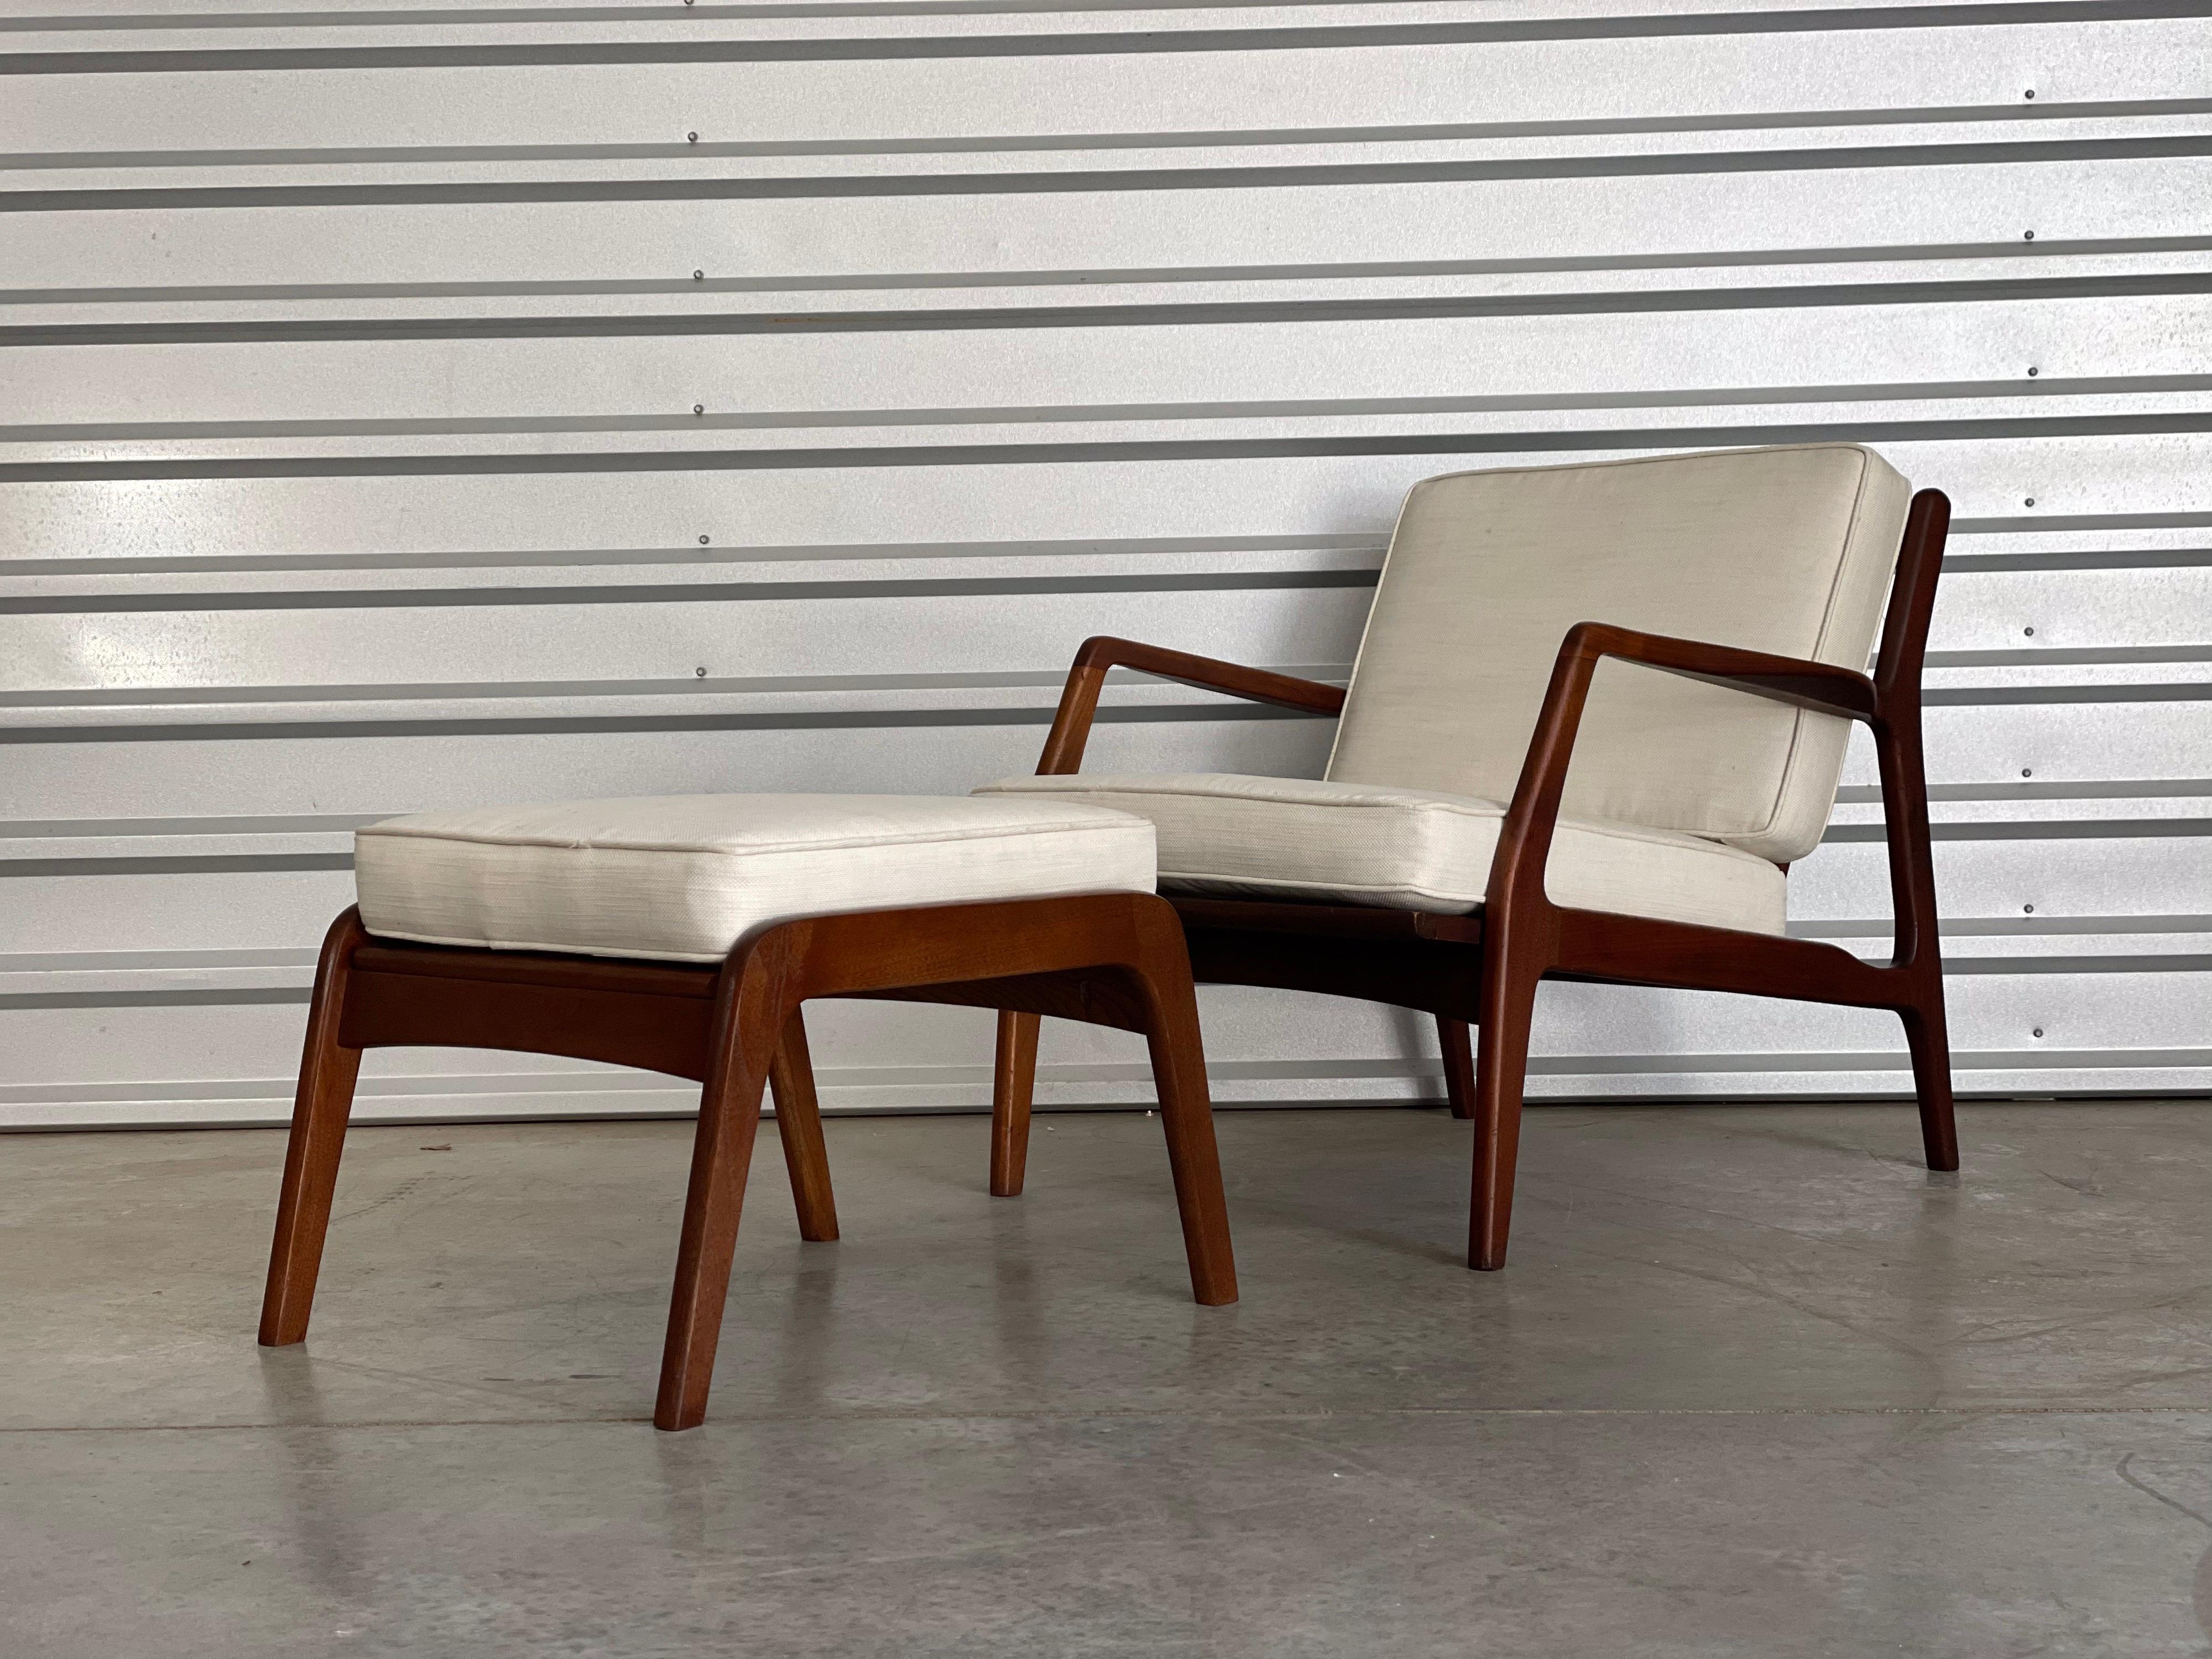 Classic American Modern 1950's lounge chair & ottoman by Lawrence Peabody for Selig; 1950's. This chair is rarely seen with the ottoman. The ottoman is refinished with new rubber straps and cushion. The lounge chair is in original condition with